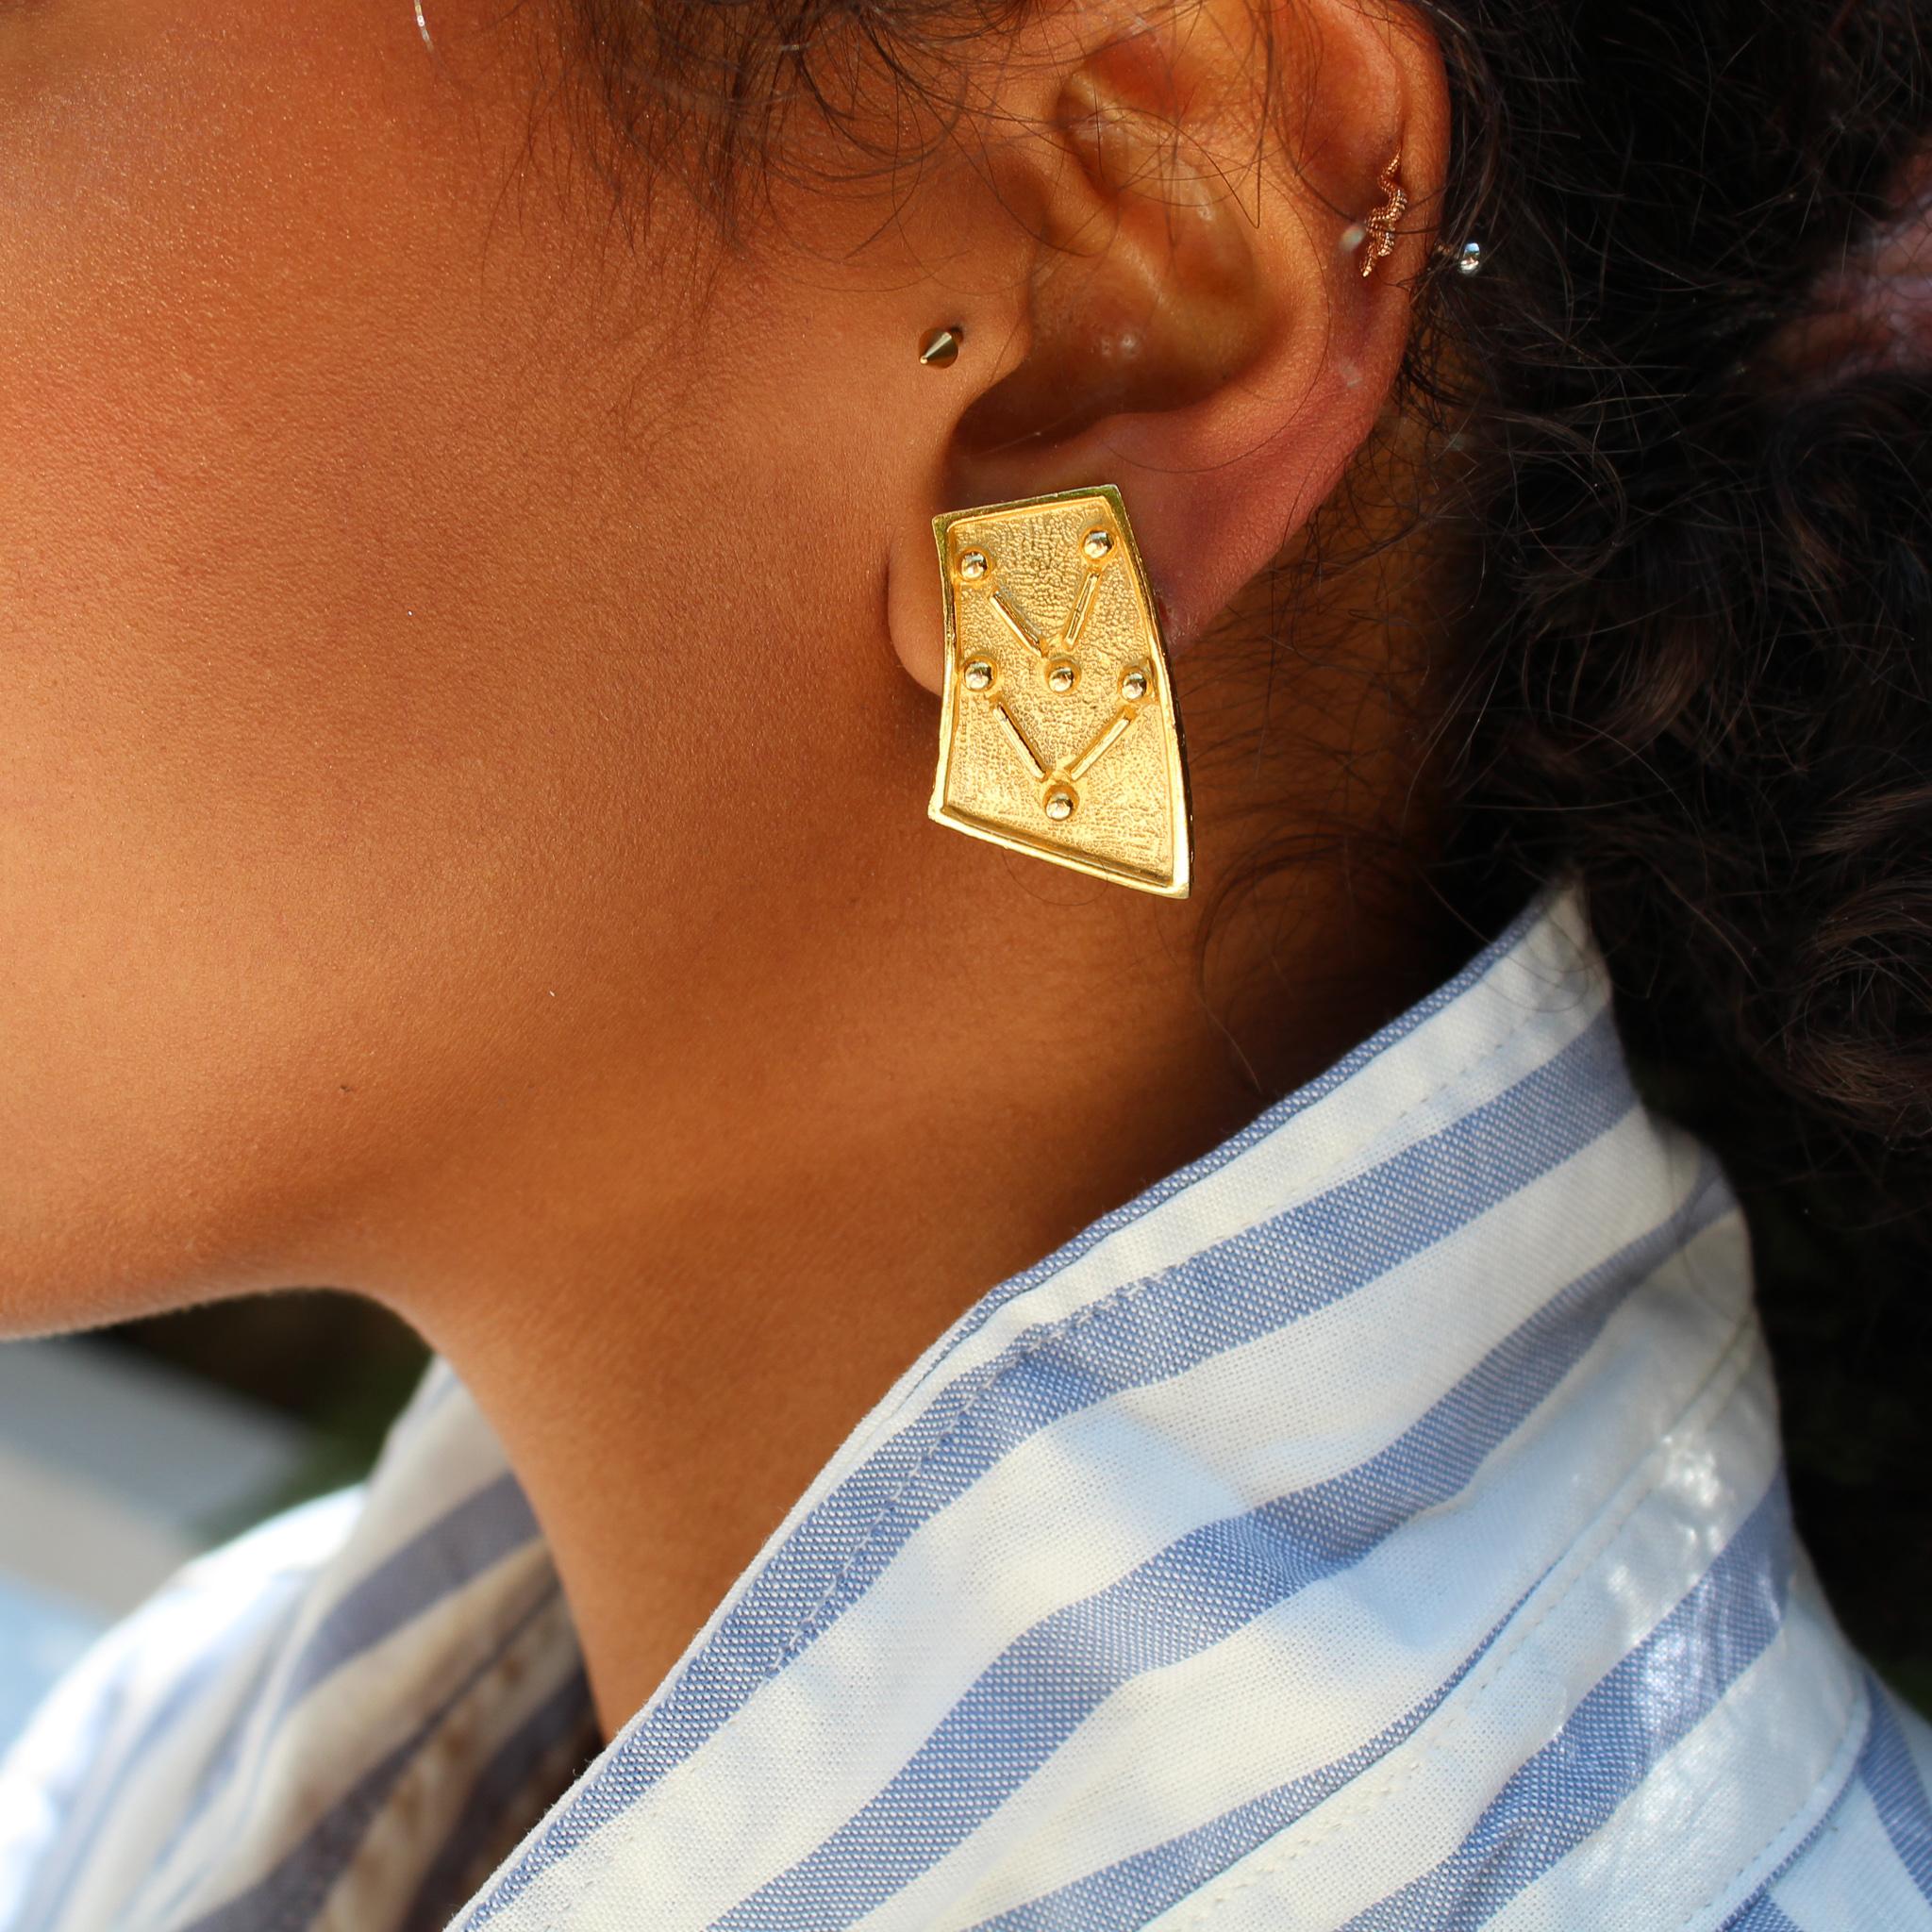 Vintage 1980s Paulo Gucci Earrings 

Cool geometric clip on earrings from Paulo Gucci. Made in Italy in the 1980s from gold plated metal.

Paolo Gucci was the grandson of Guccio Gucci, the founder of the Gucci fashion house. Paolo had a short stint